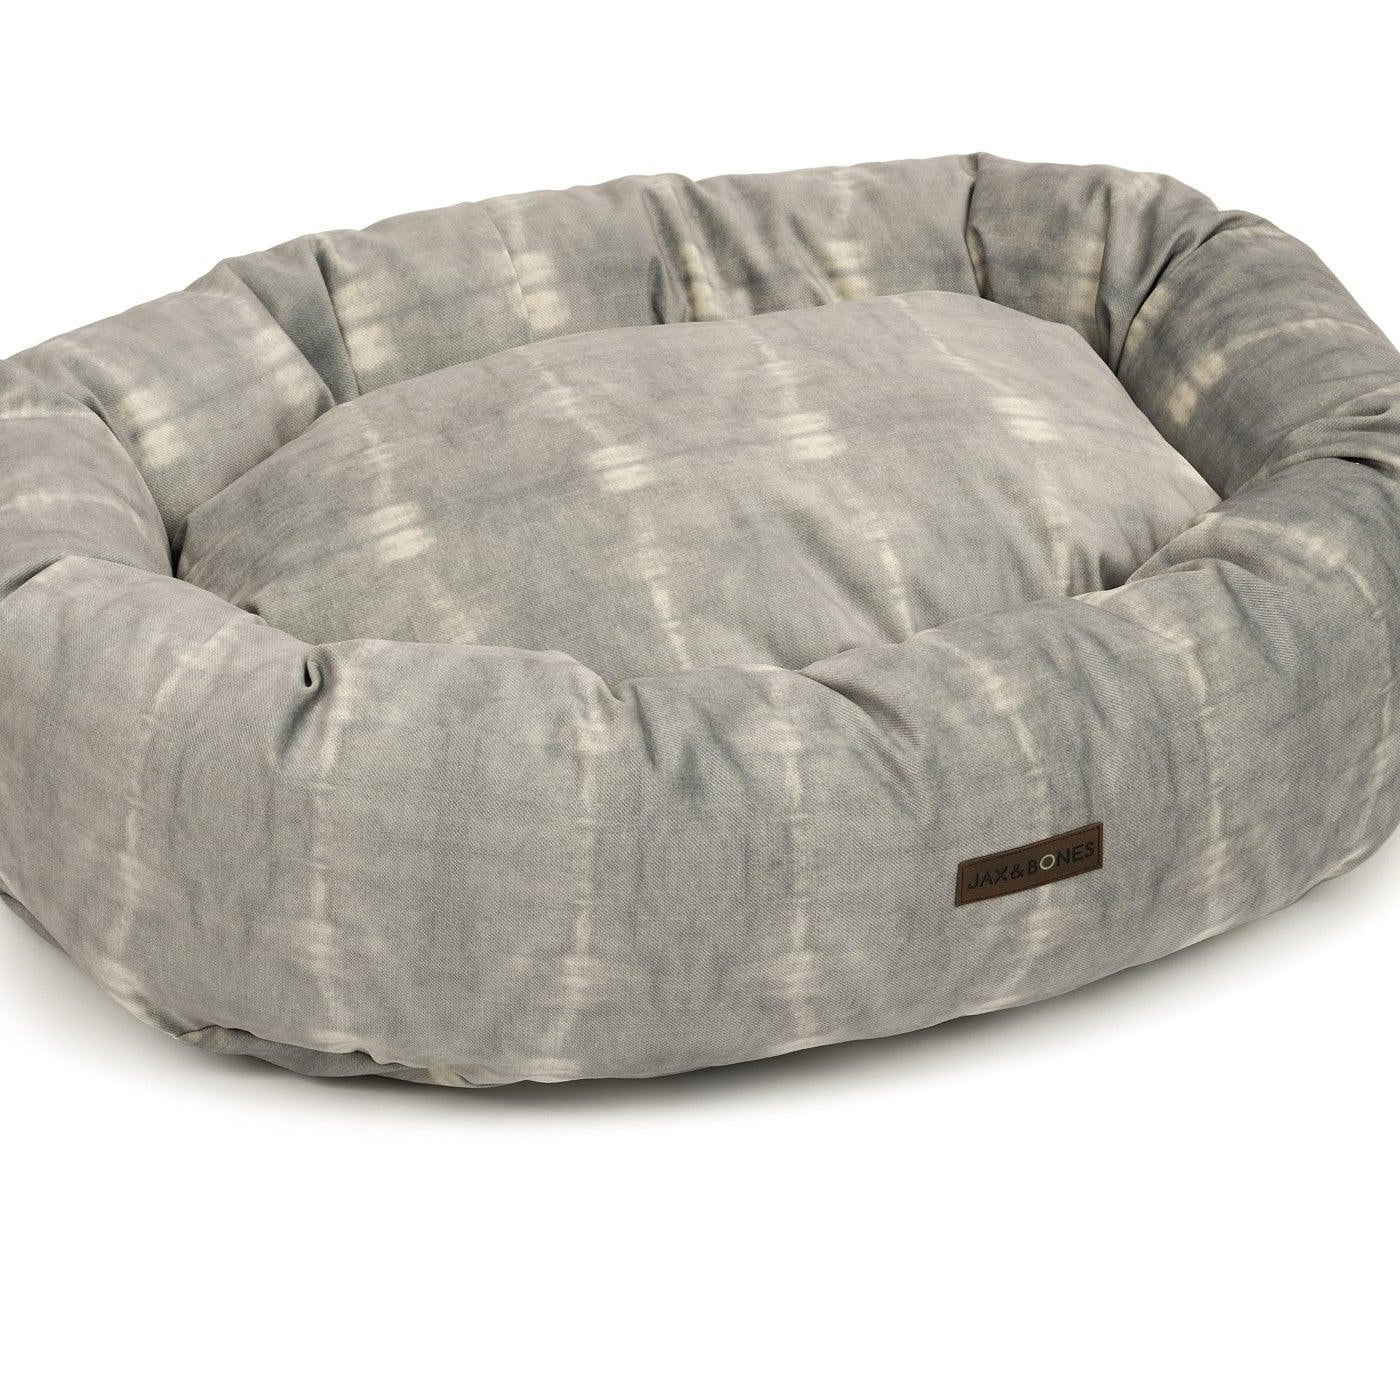 Anya Seafoam Donut Bed - Rocky & Maggie's Pet Boutique and Salon